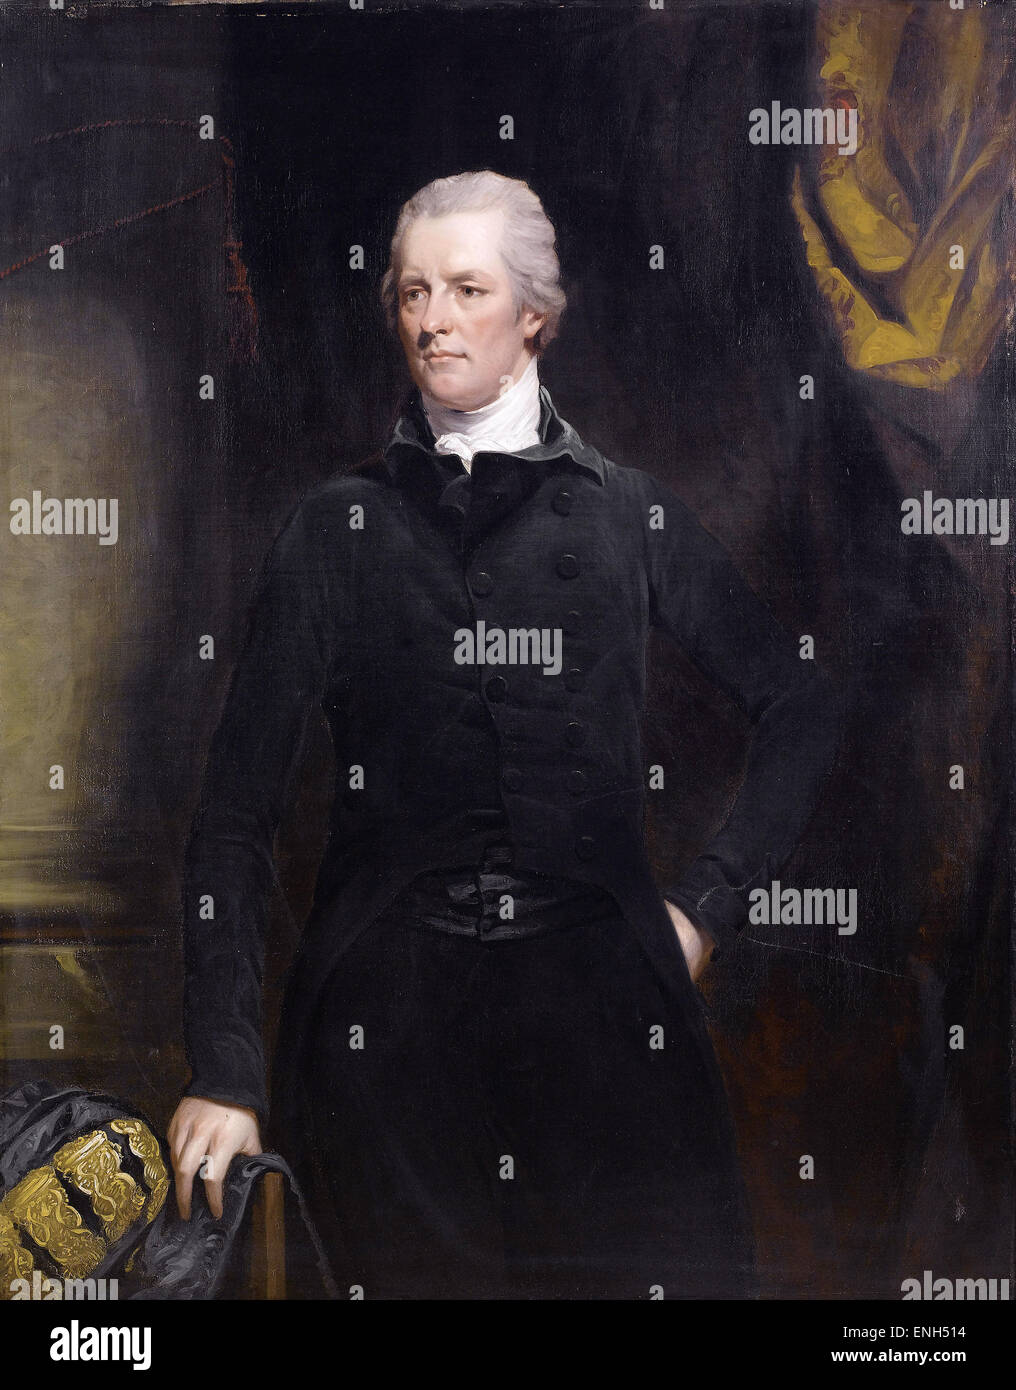 William Pitt the Younger youngest Prime Minister of Great Britain in 1783 Stock Photo